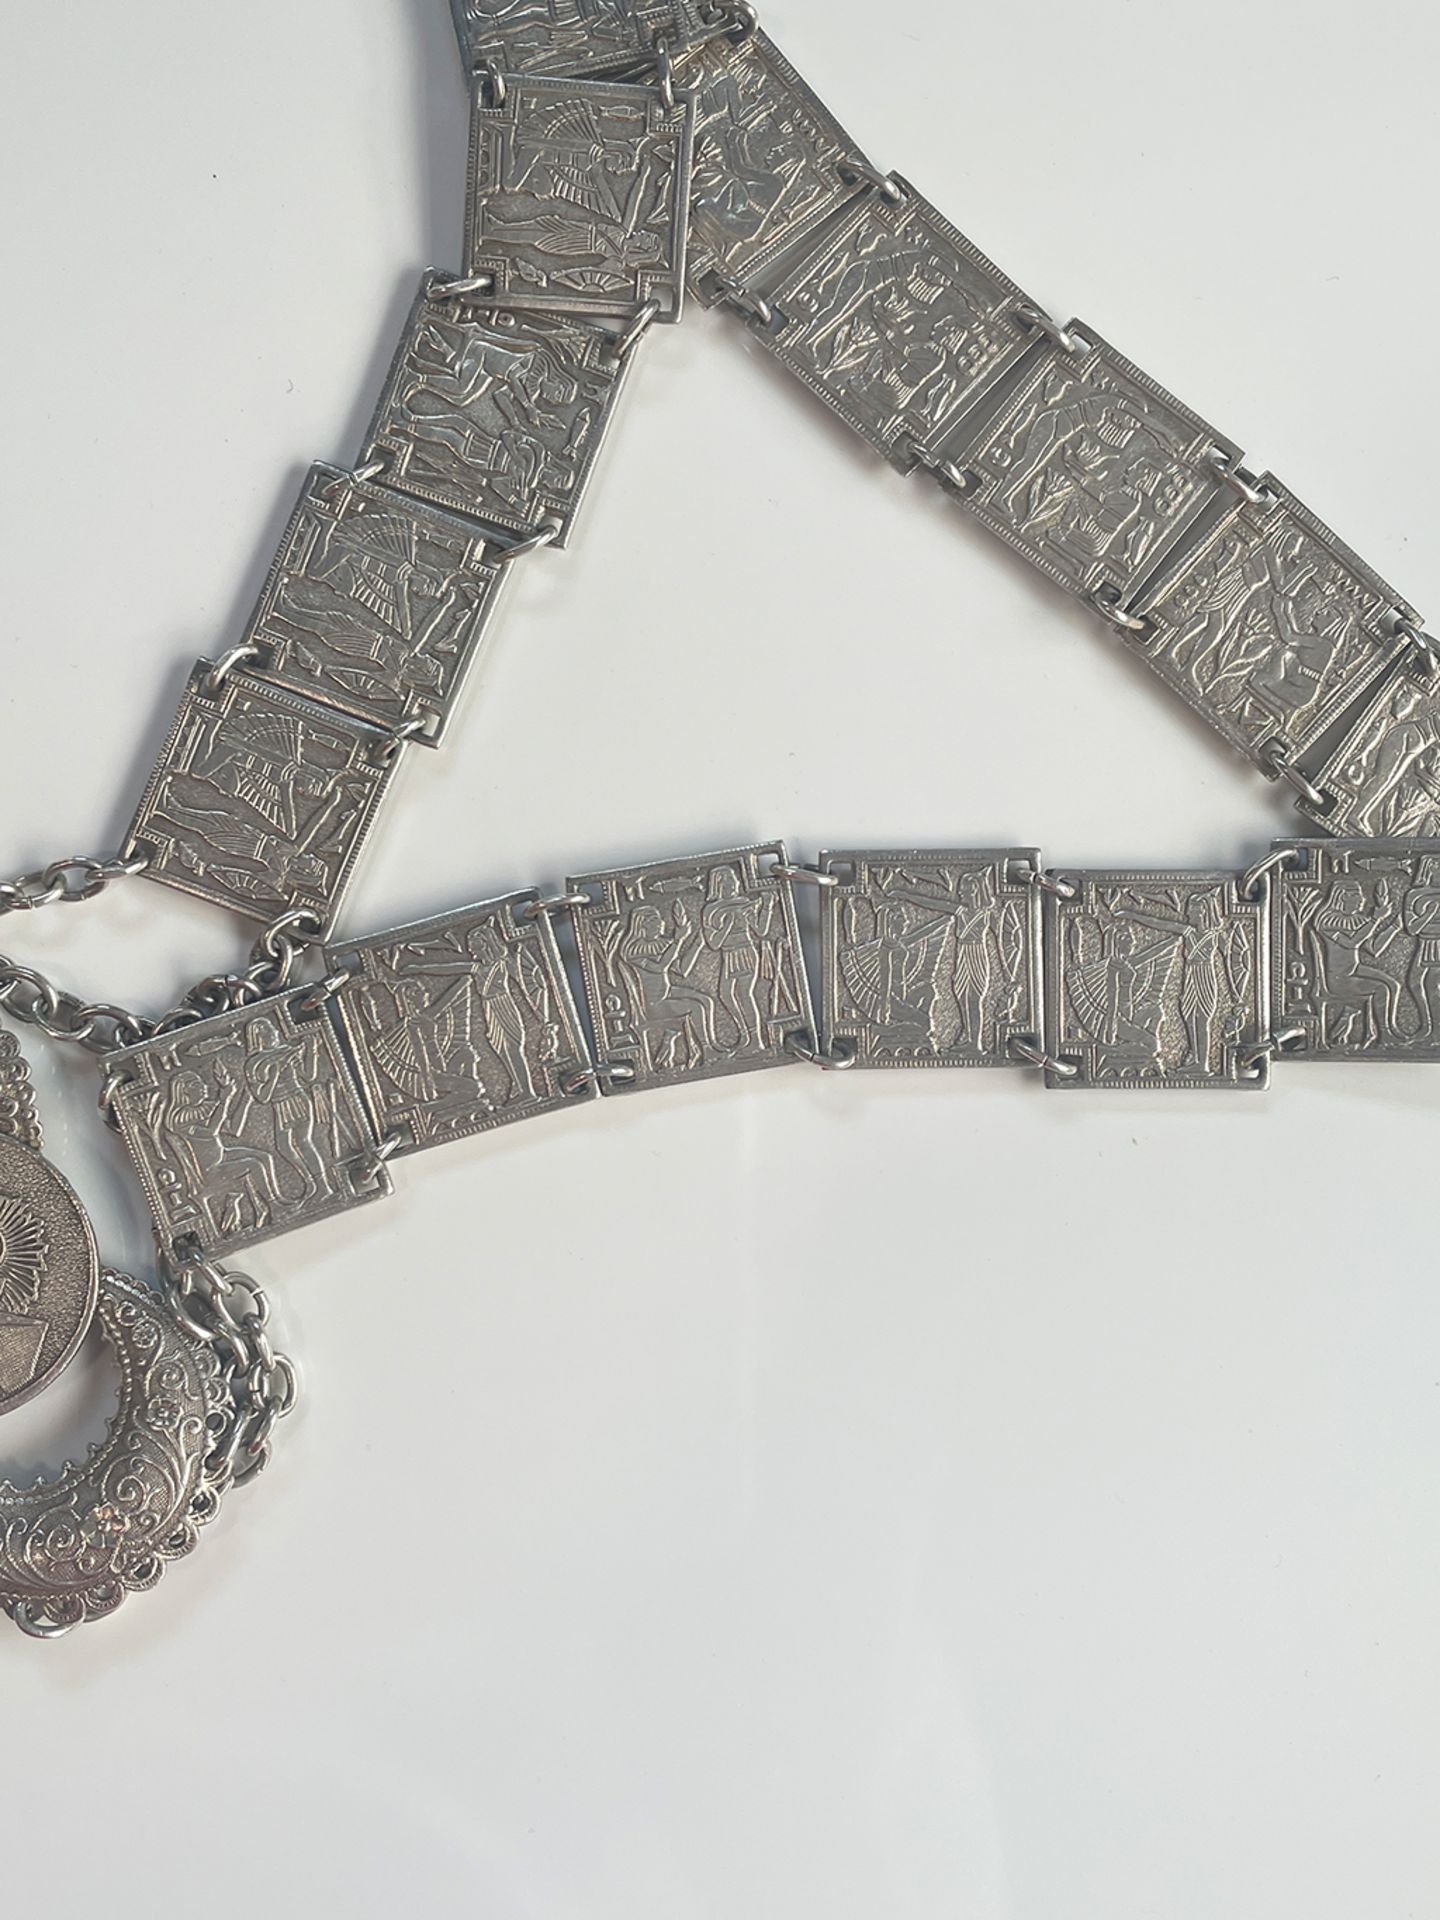 Old silver belt with Egyptian motifs - Image 2 of 7